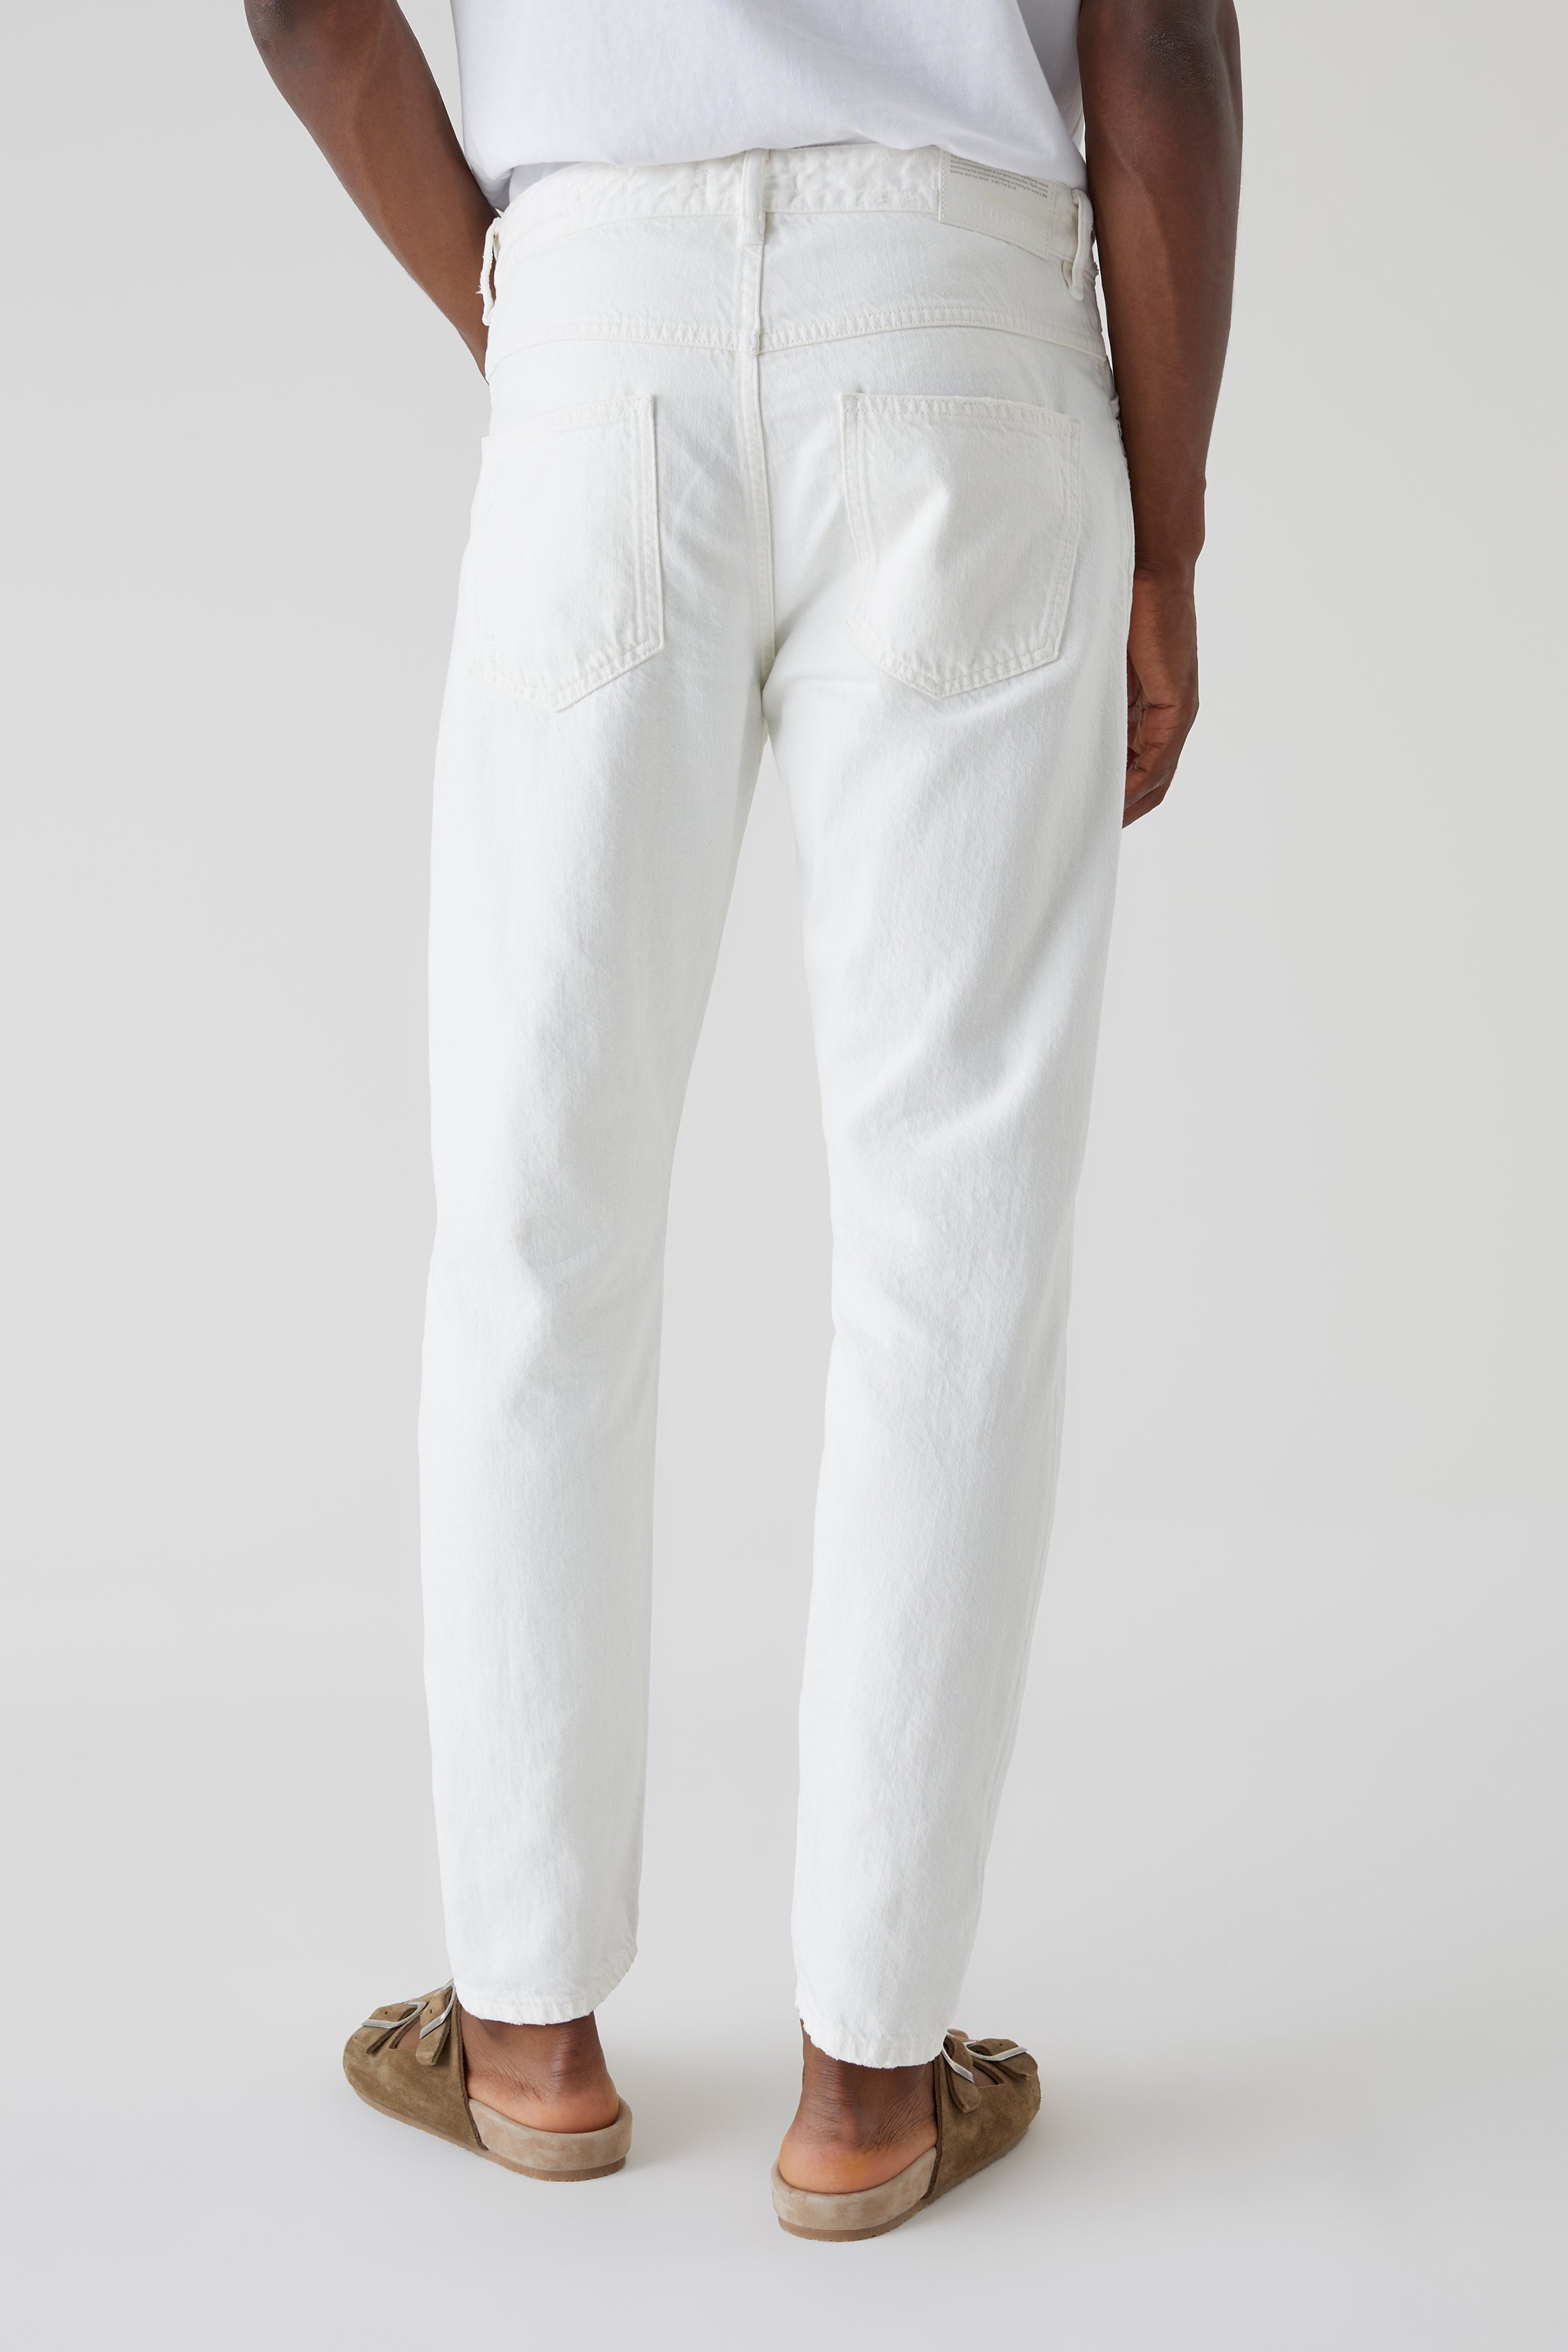 CLOSED-OUTLET-SALE-STYLE-NAME-COOPER-TAPERED-JEANS-Hosen-ARCHIVE-COLLECTION-3_ea8ea247-b305-4992-b791-f8b3eaa087f2.jpg